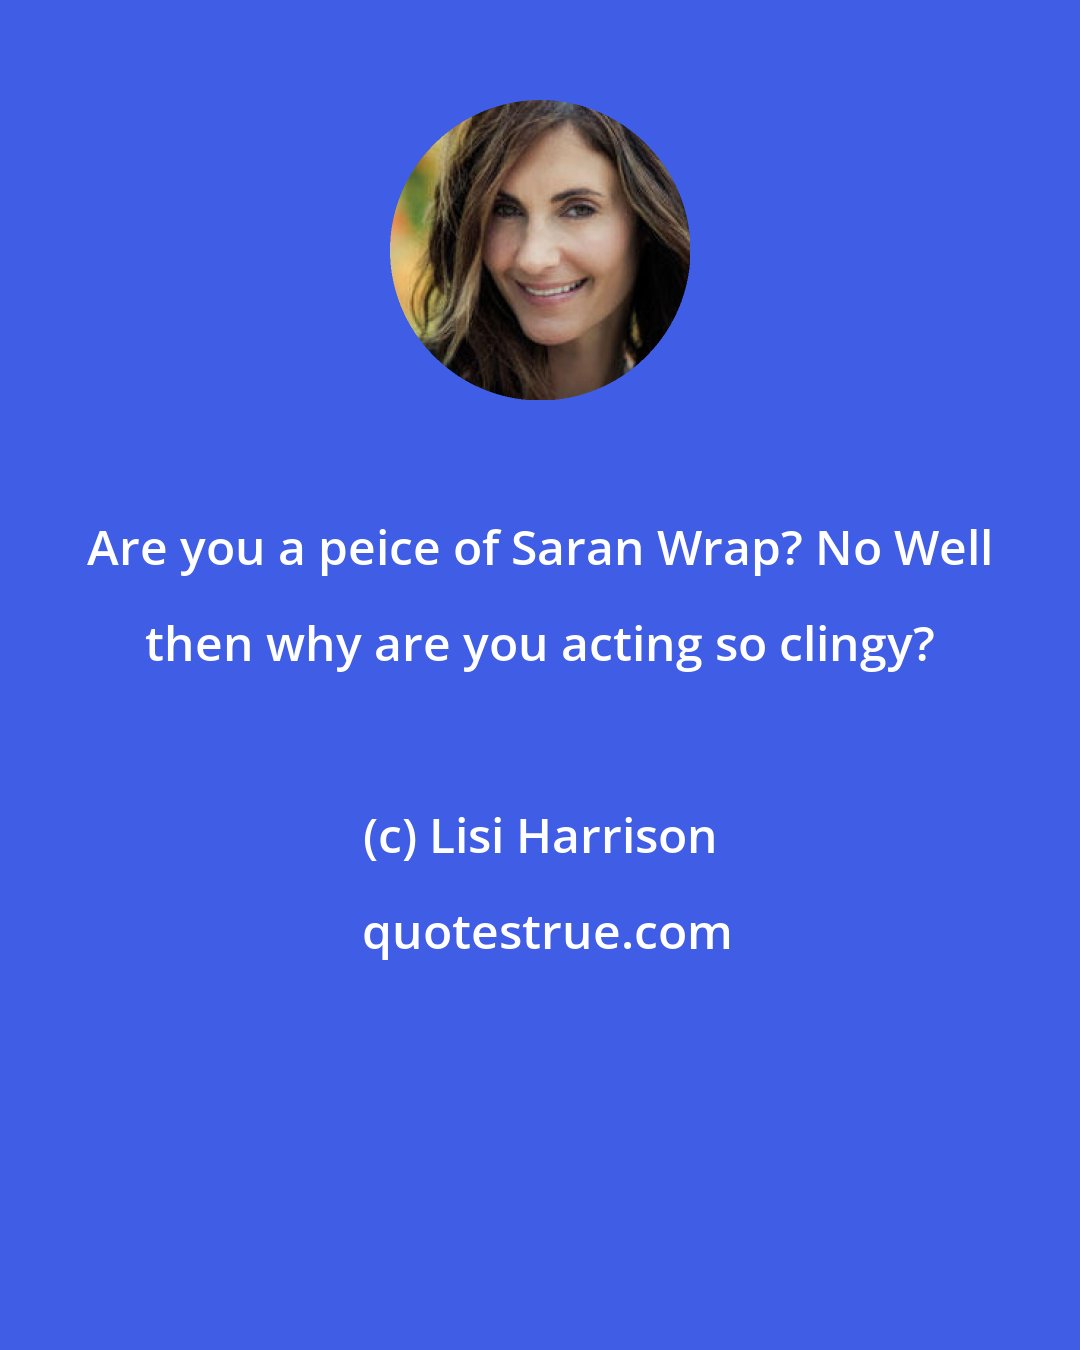 Lisi Harrison: Are you a peice of Saran Wrap? No Well then why are you acting so clingy?